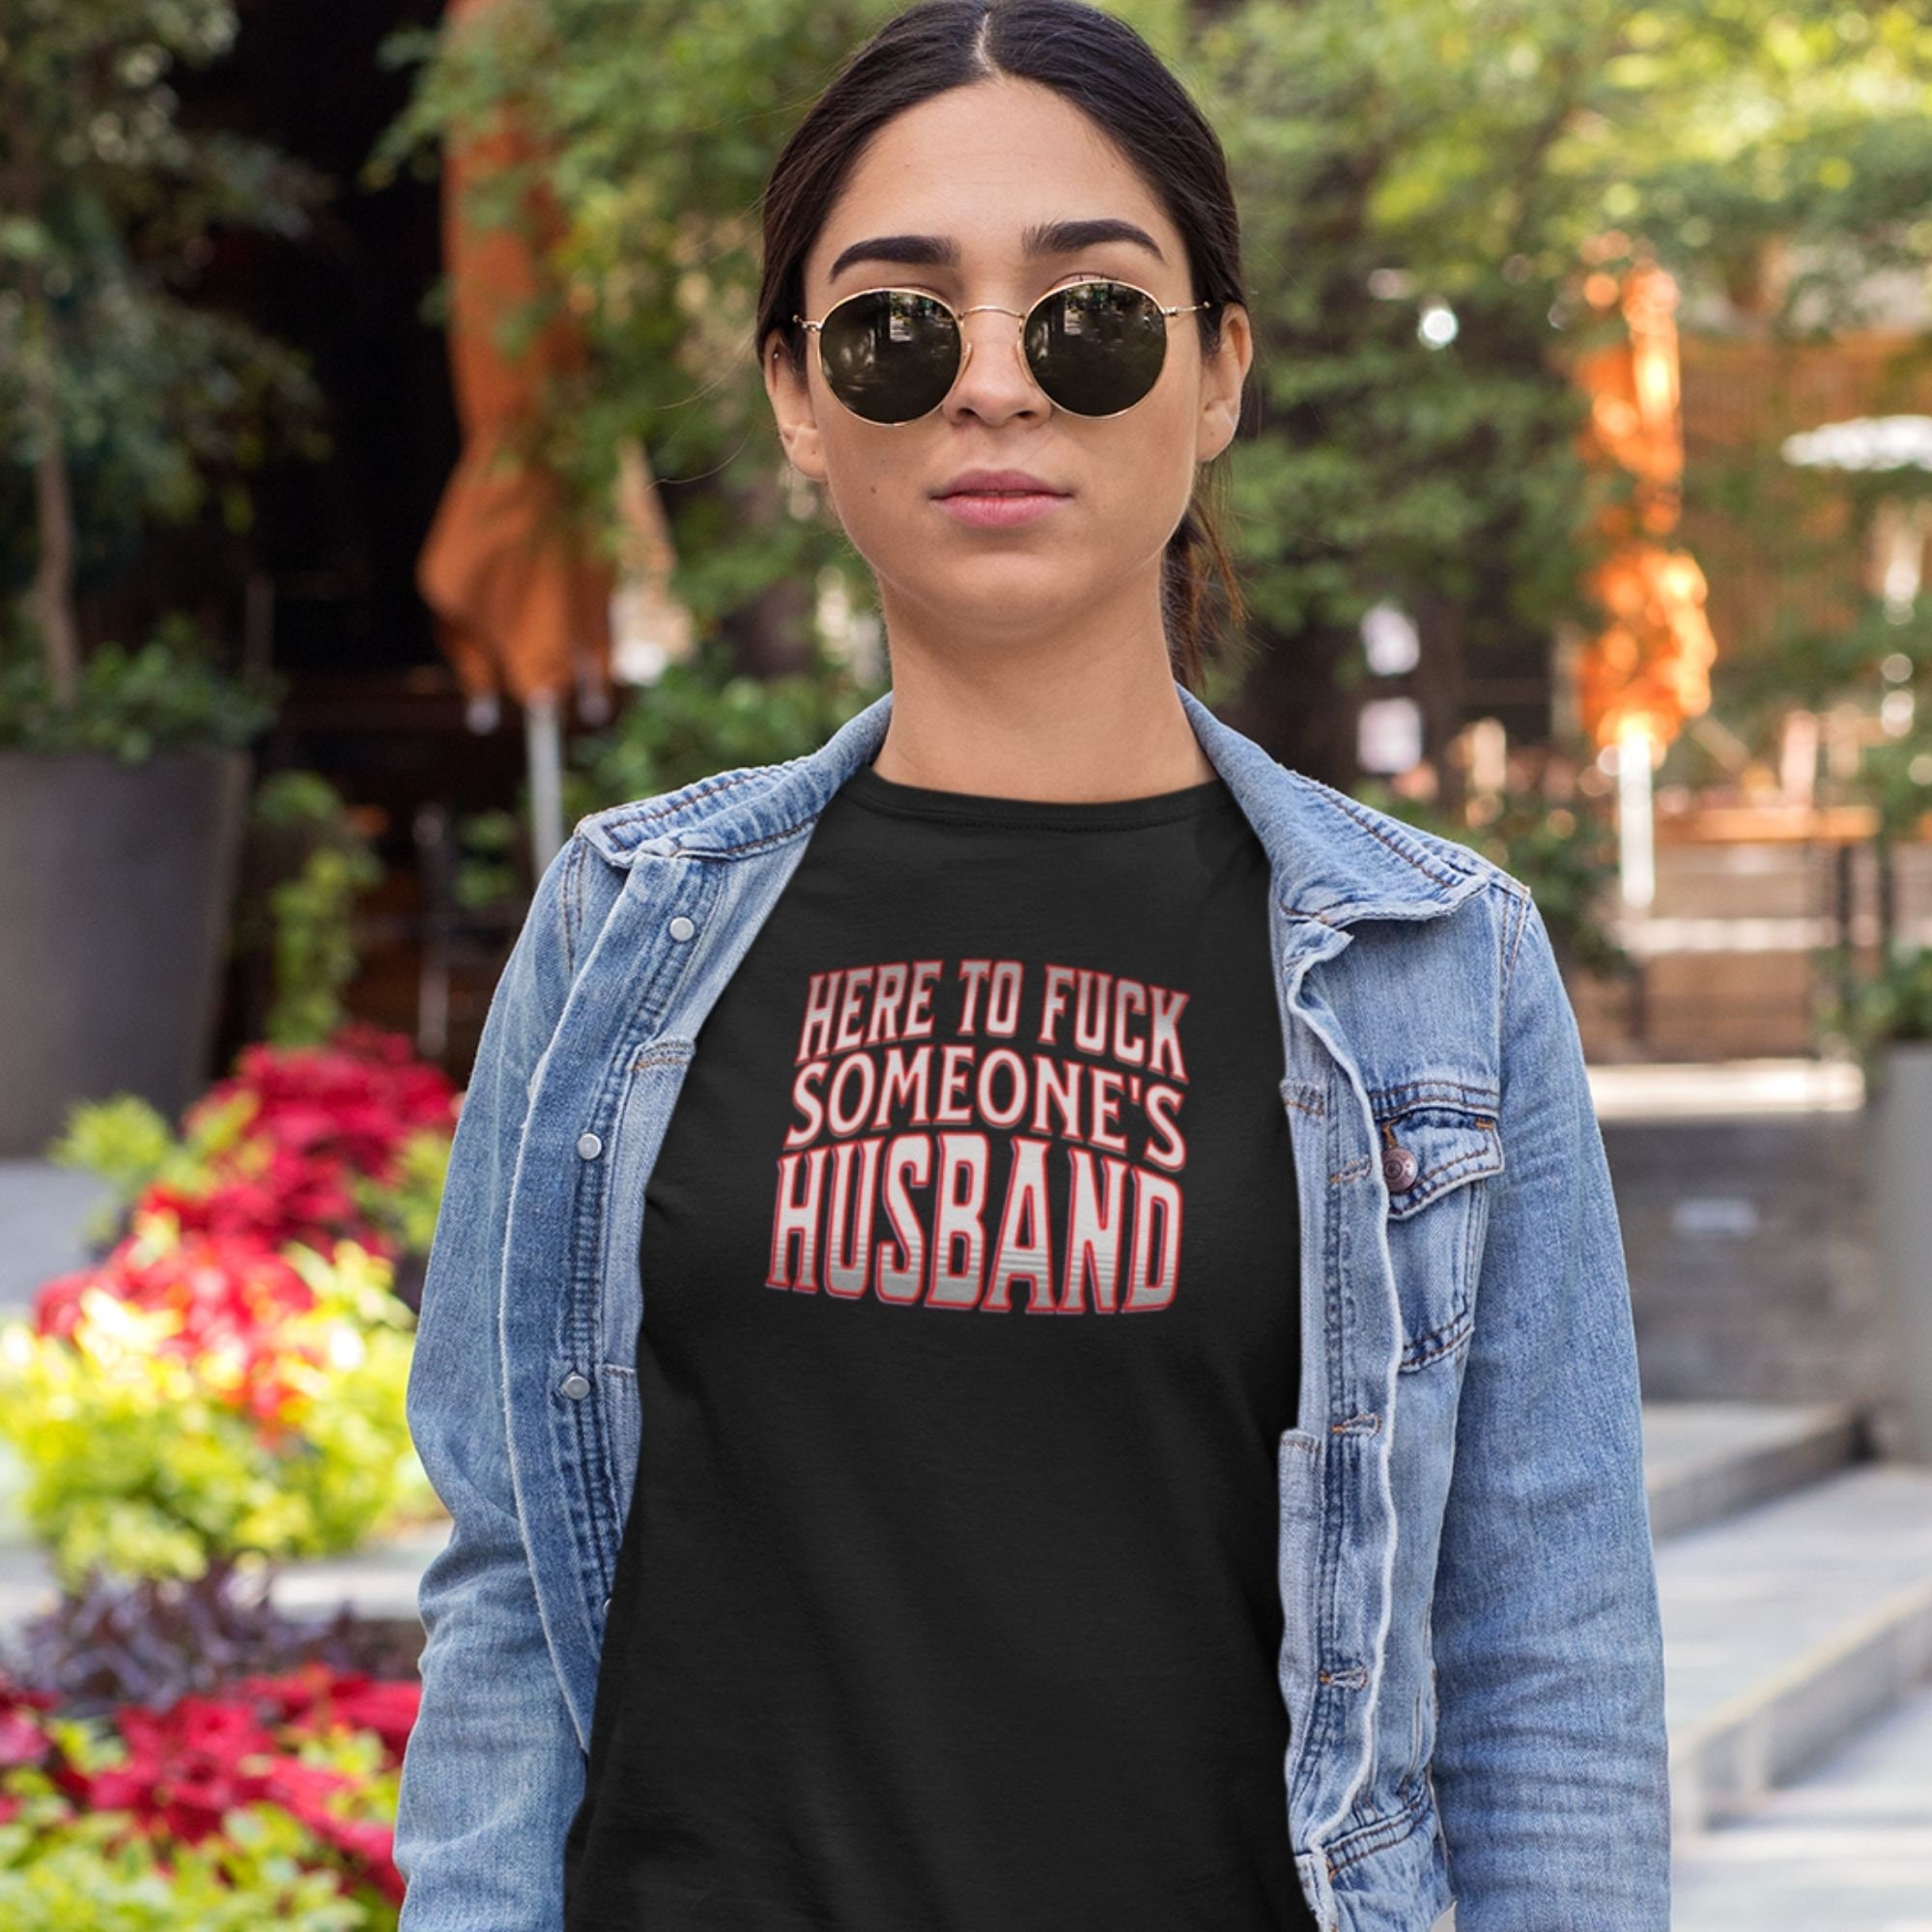 Here to Fuck Someones Husband T-shirt DILF Hunter Shirt picture